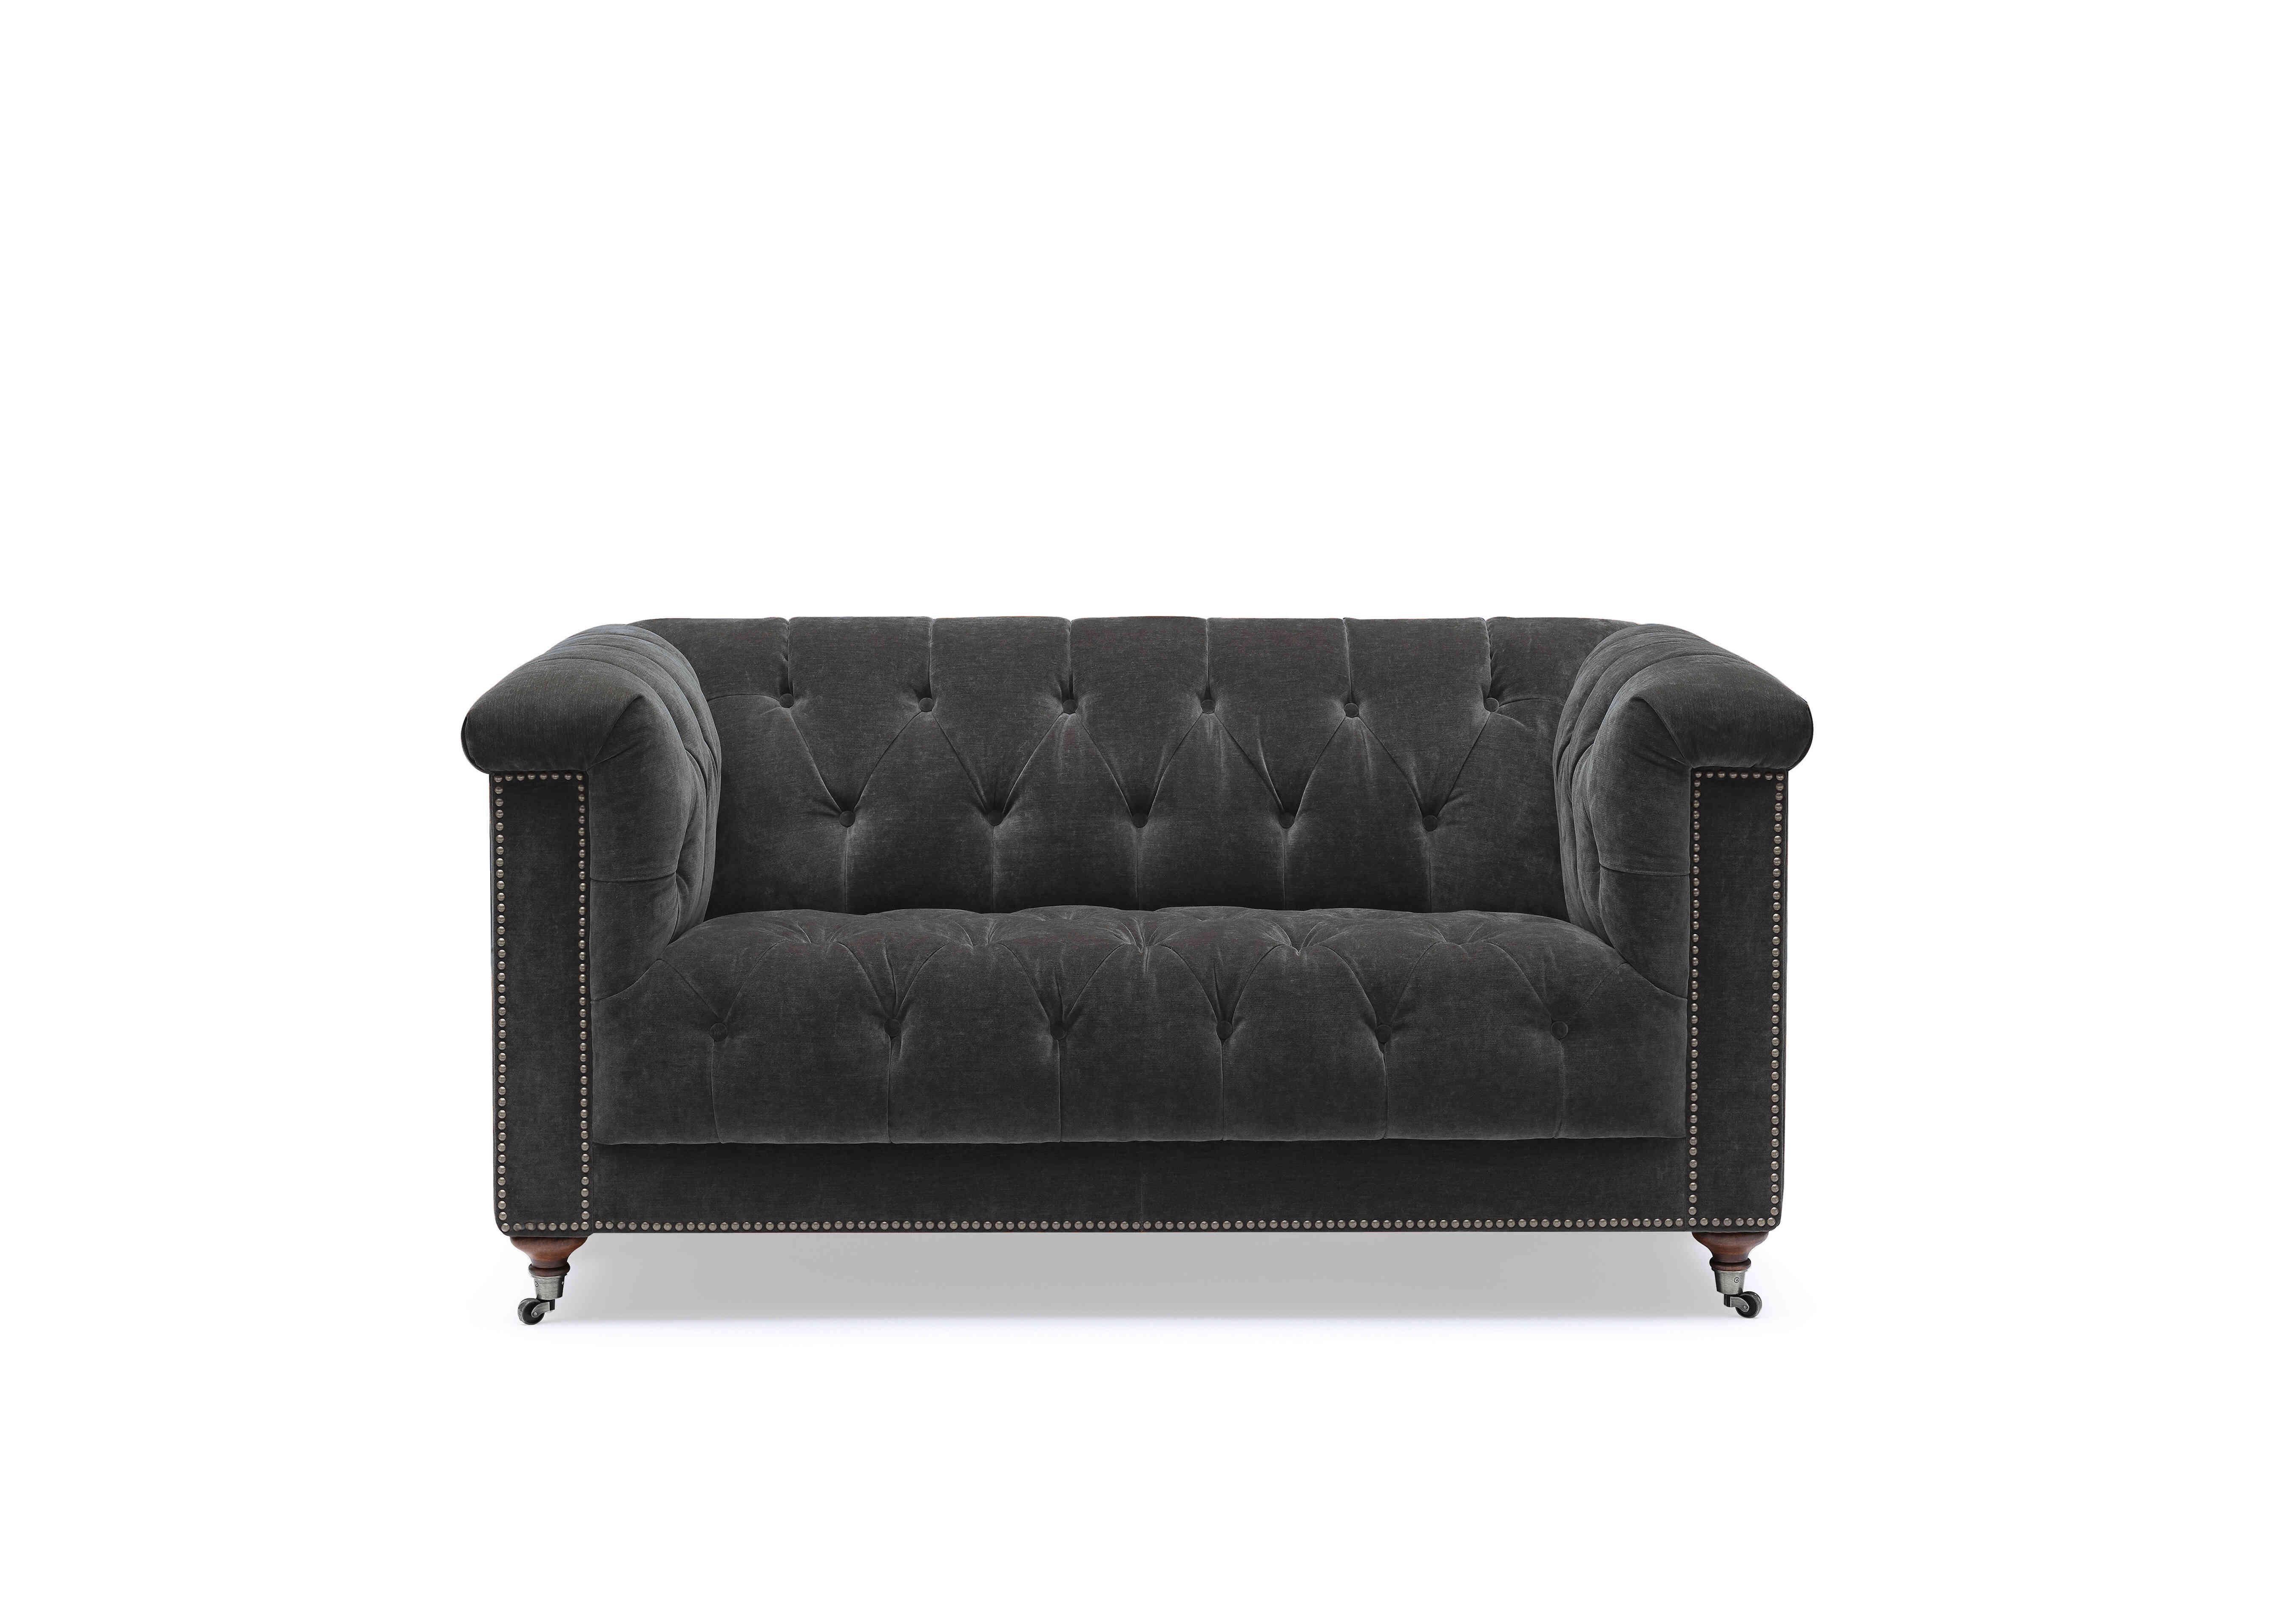 Wallace 2 Seater Fabric Chesterfield Sofa in X3y2-W021 Moonstone on Furniture Village